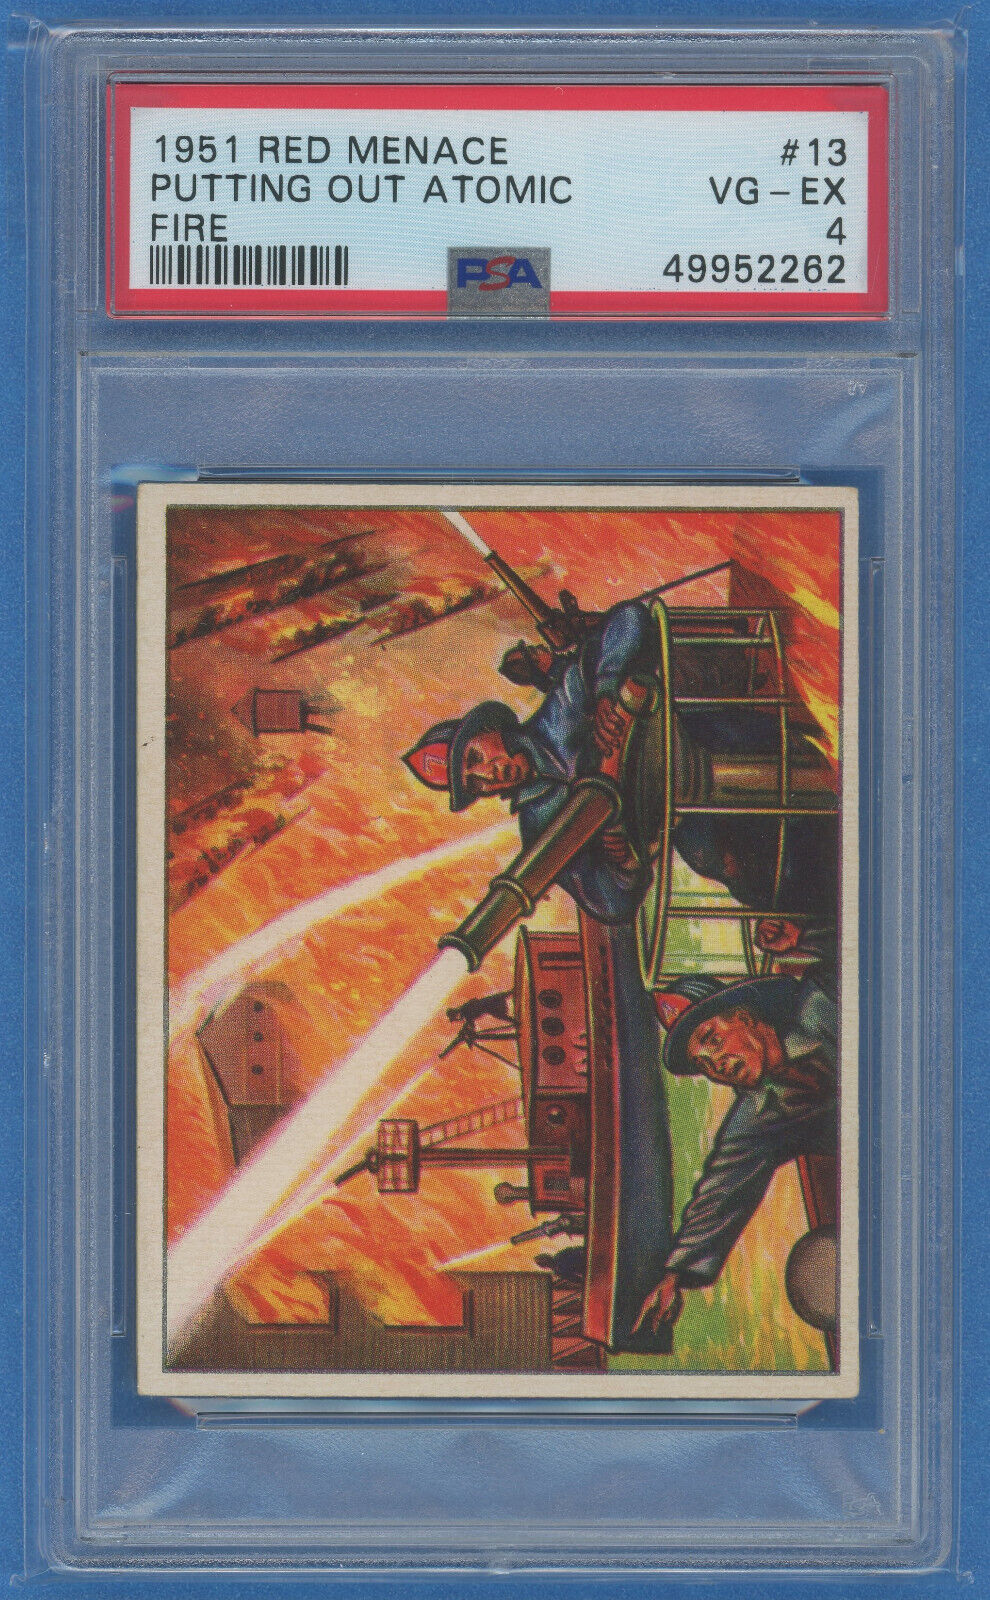 1951 BOWMAN RED MENACE #13 Putting Out Atomic Fire PSA 4